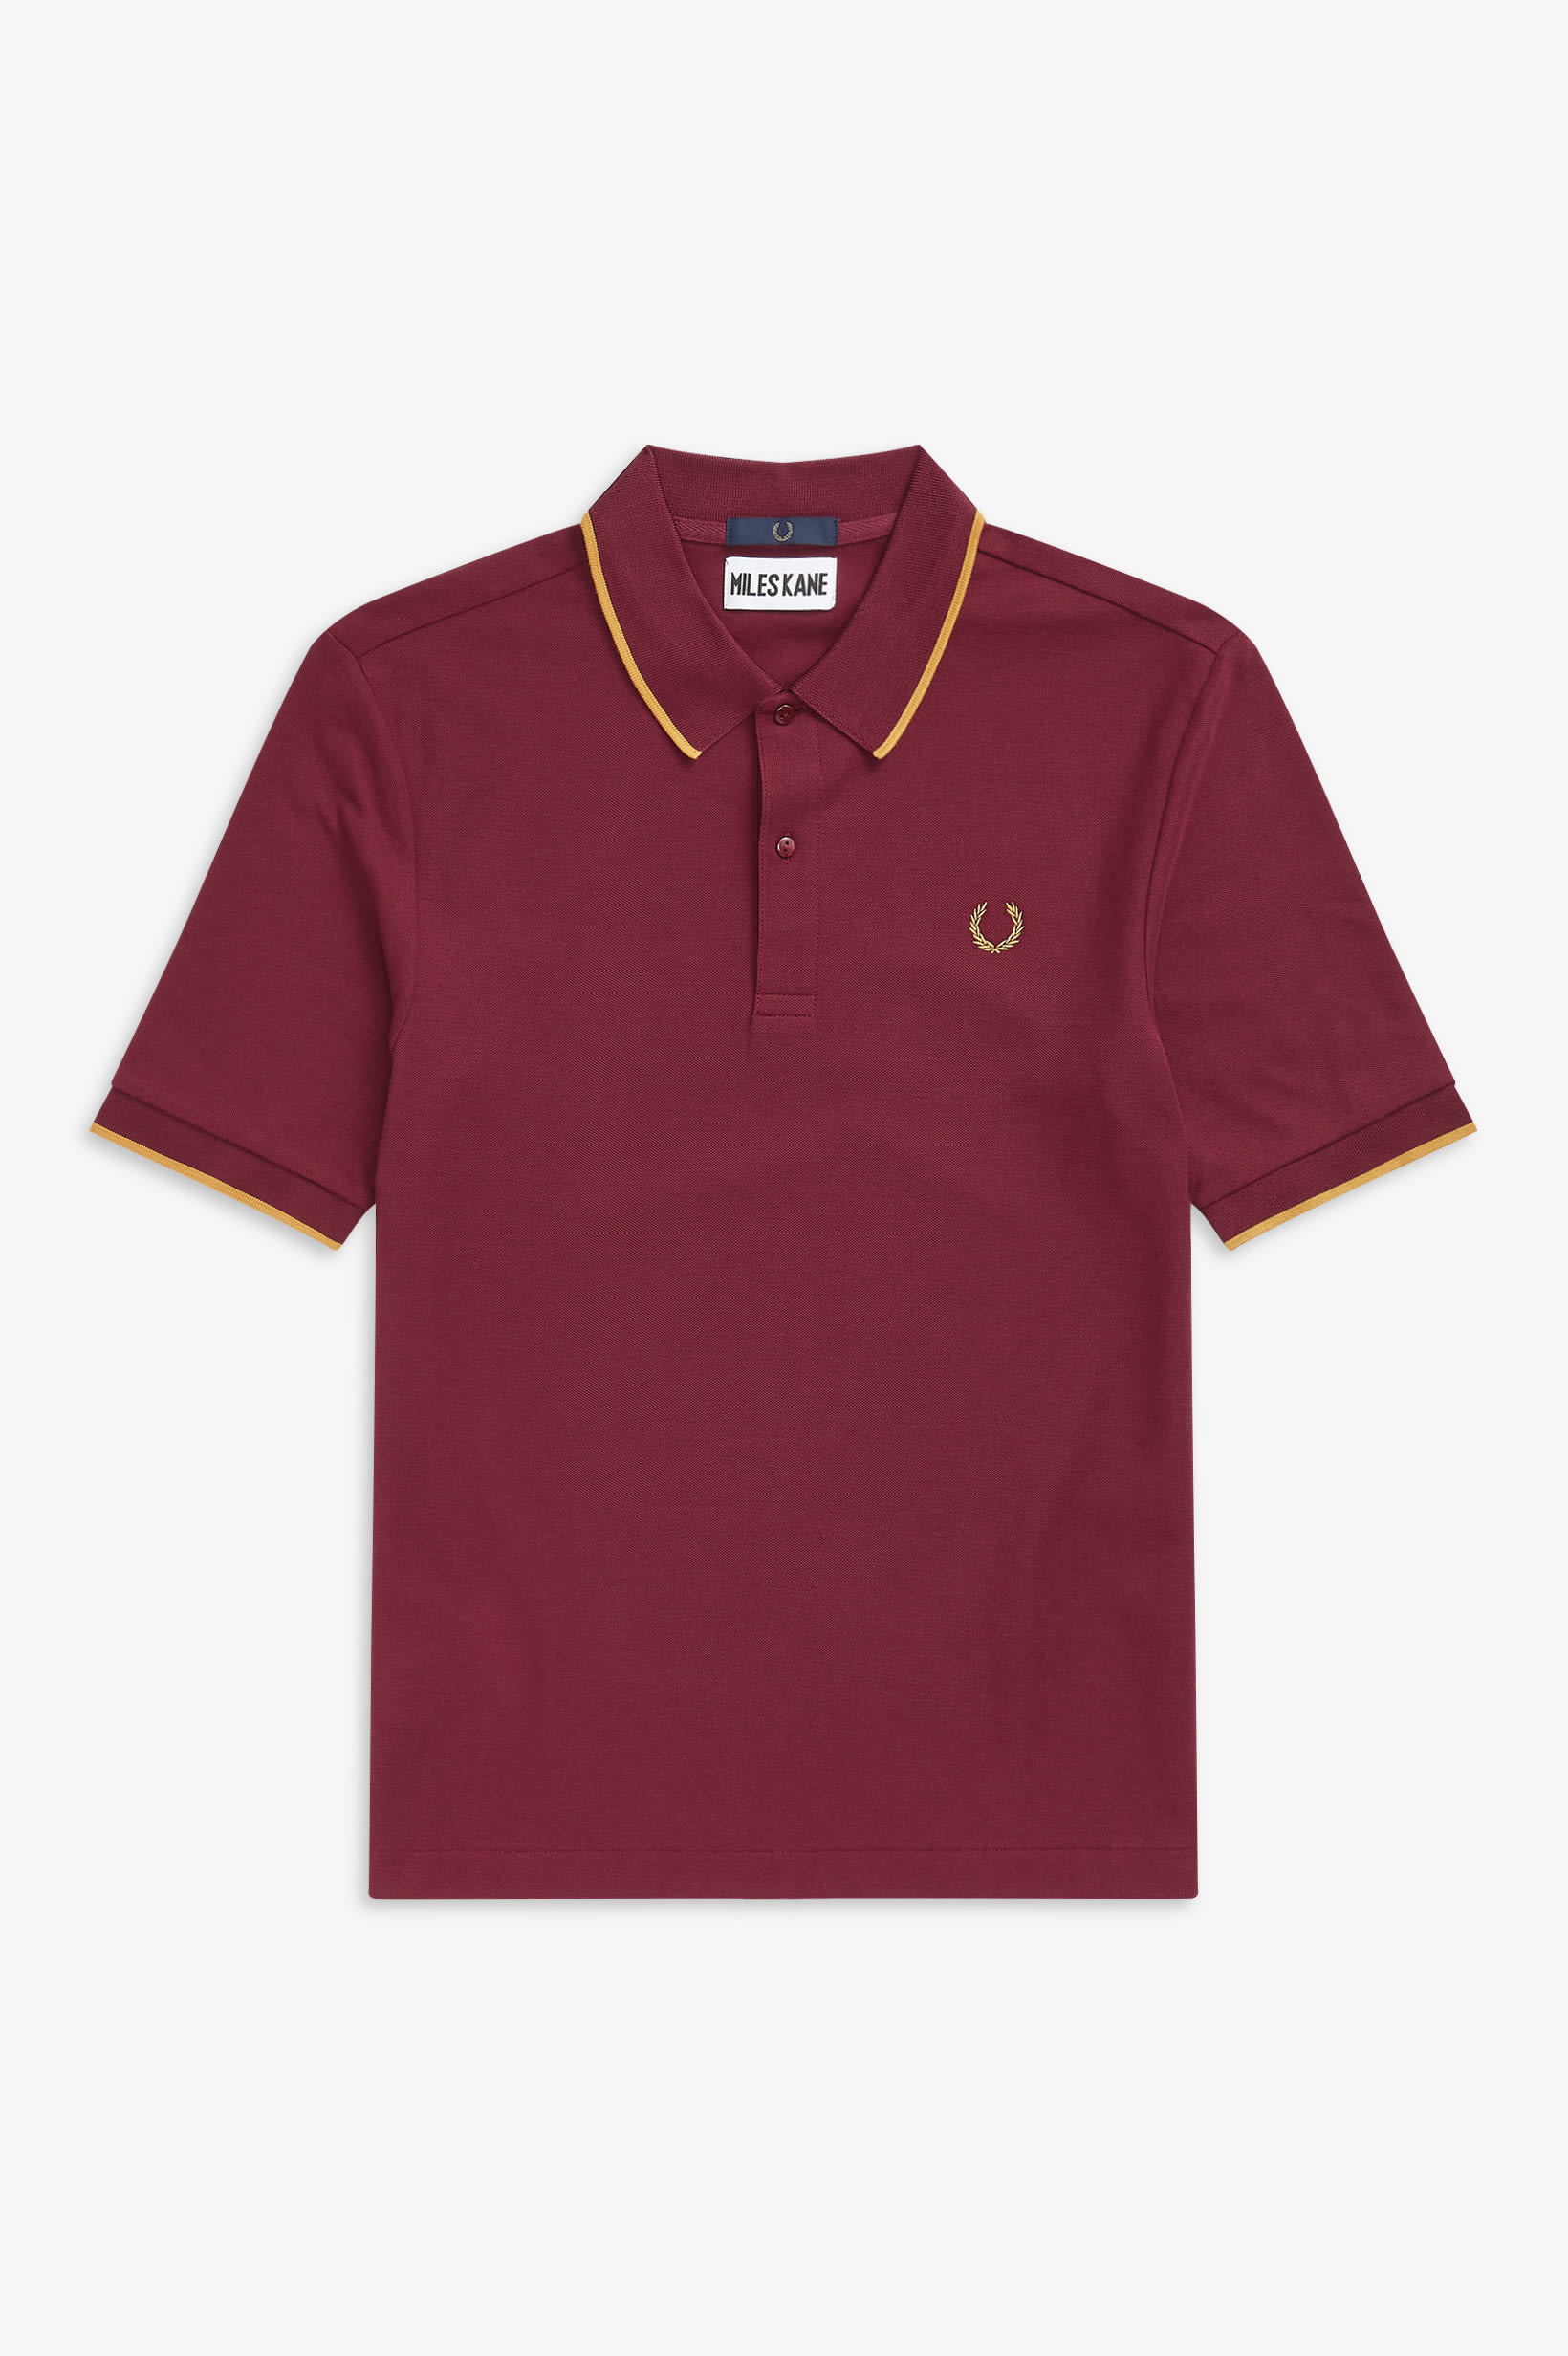 fred-perry-miles-kane-19-7